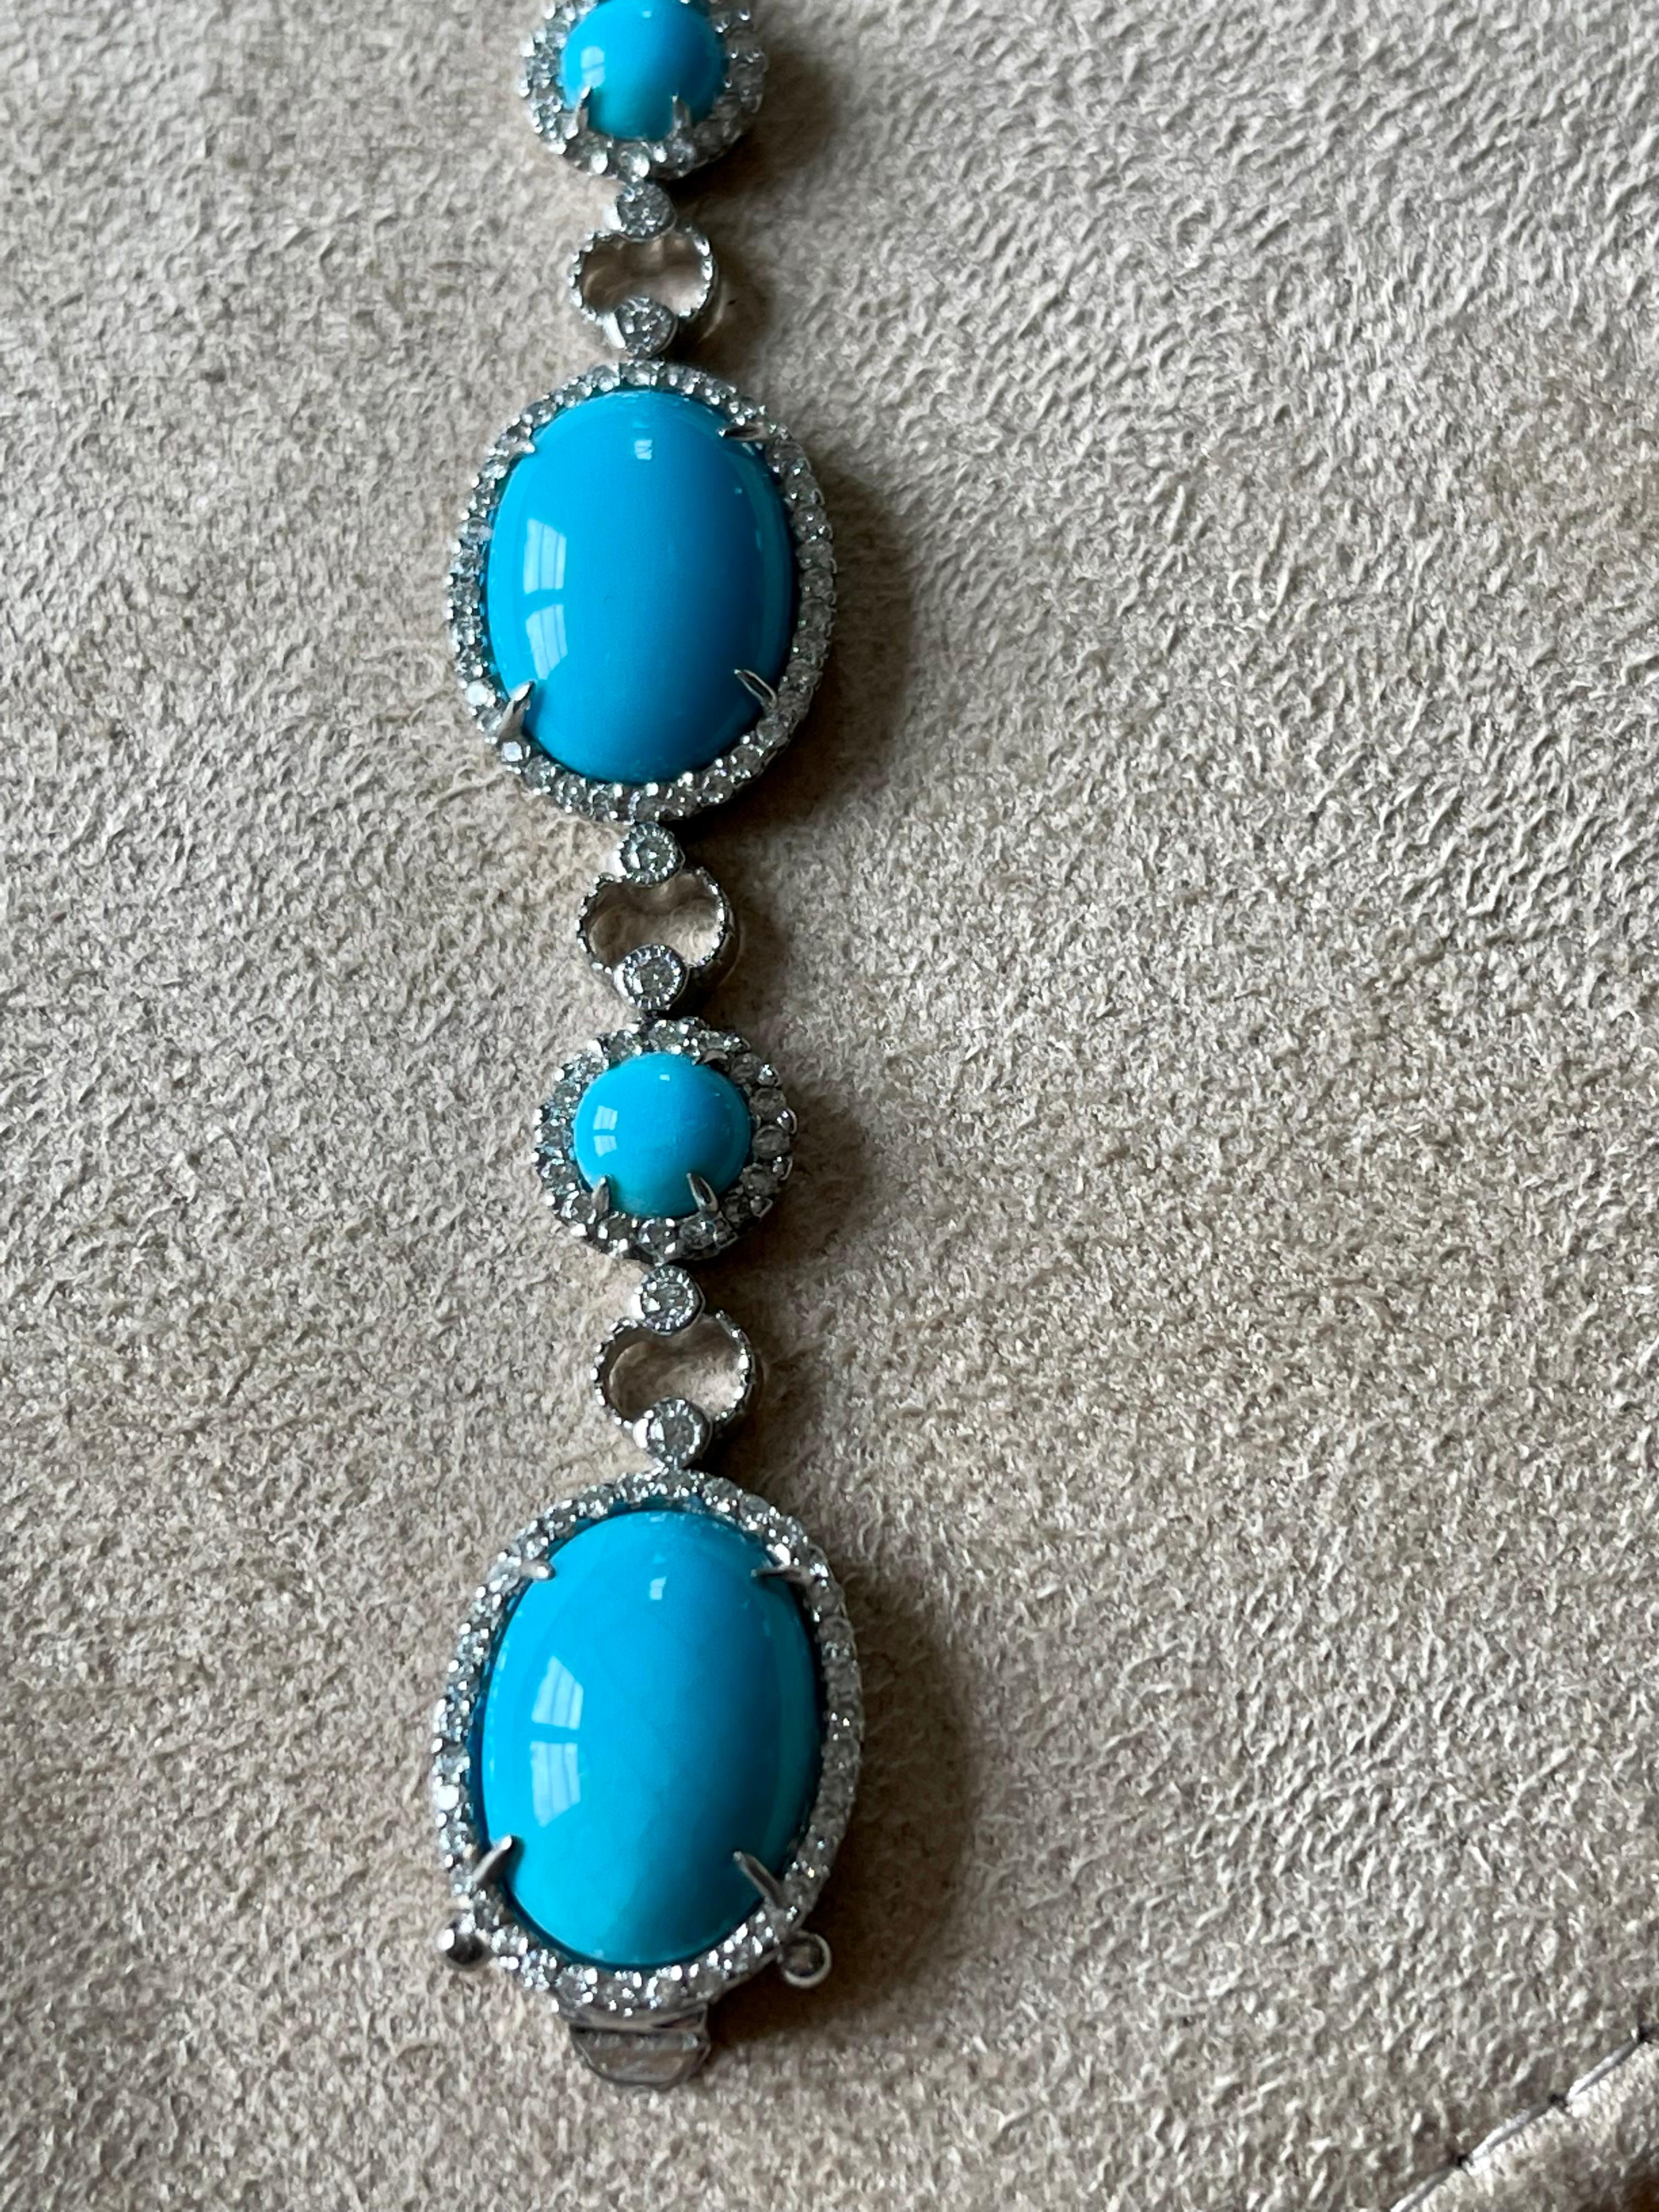 Attractive 18 K white Gold bracelet featuring 10 natural slepping Beauty Turquoise Cabochons each aurroounded by a total 0f 295 brilliant cut Diamonds weighing 1.80 ct. 
Length: 19 cm
Masterfully handcrafted piece! Authenticity and money back is